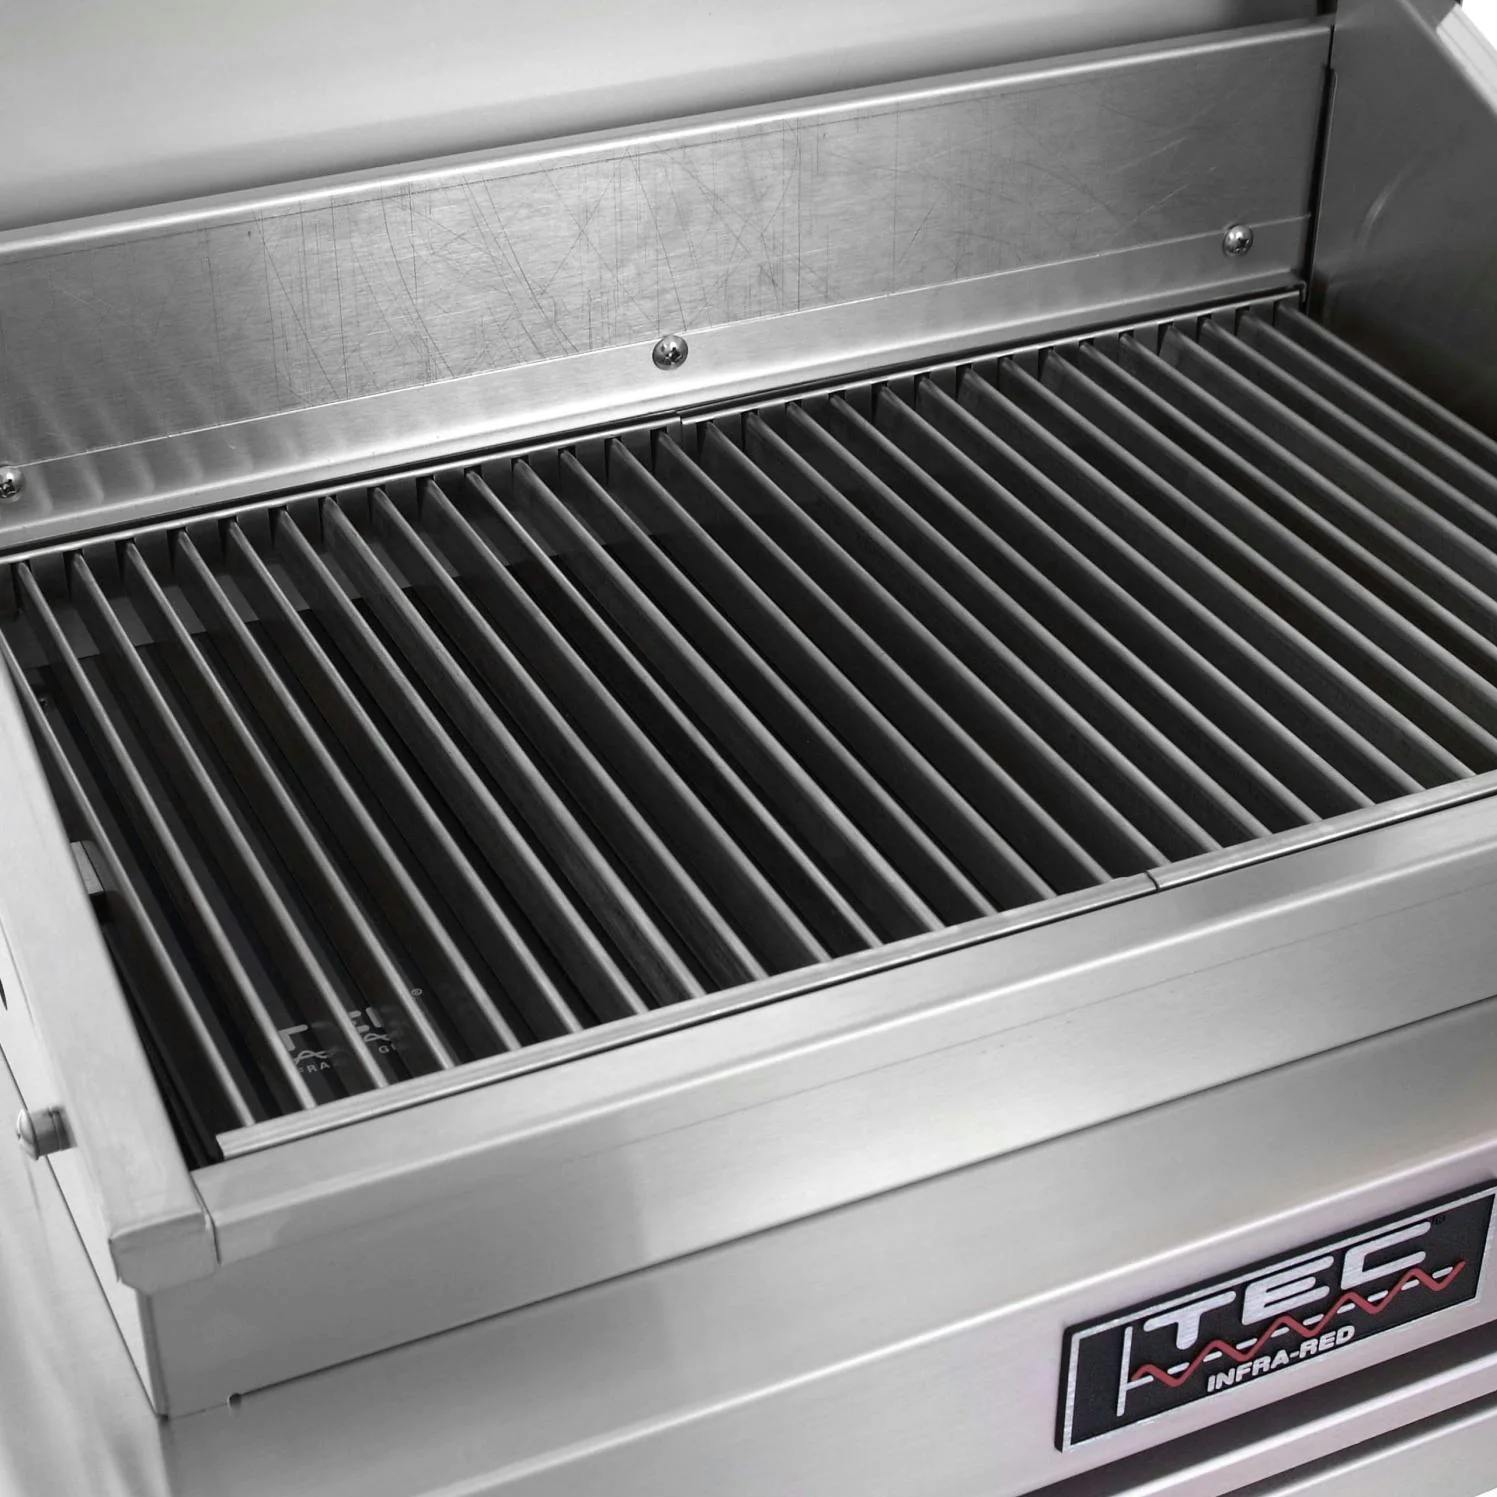 TEC G-Sport FR Portable Infrared Gas Grill · Propane